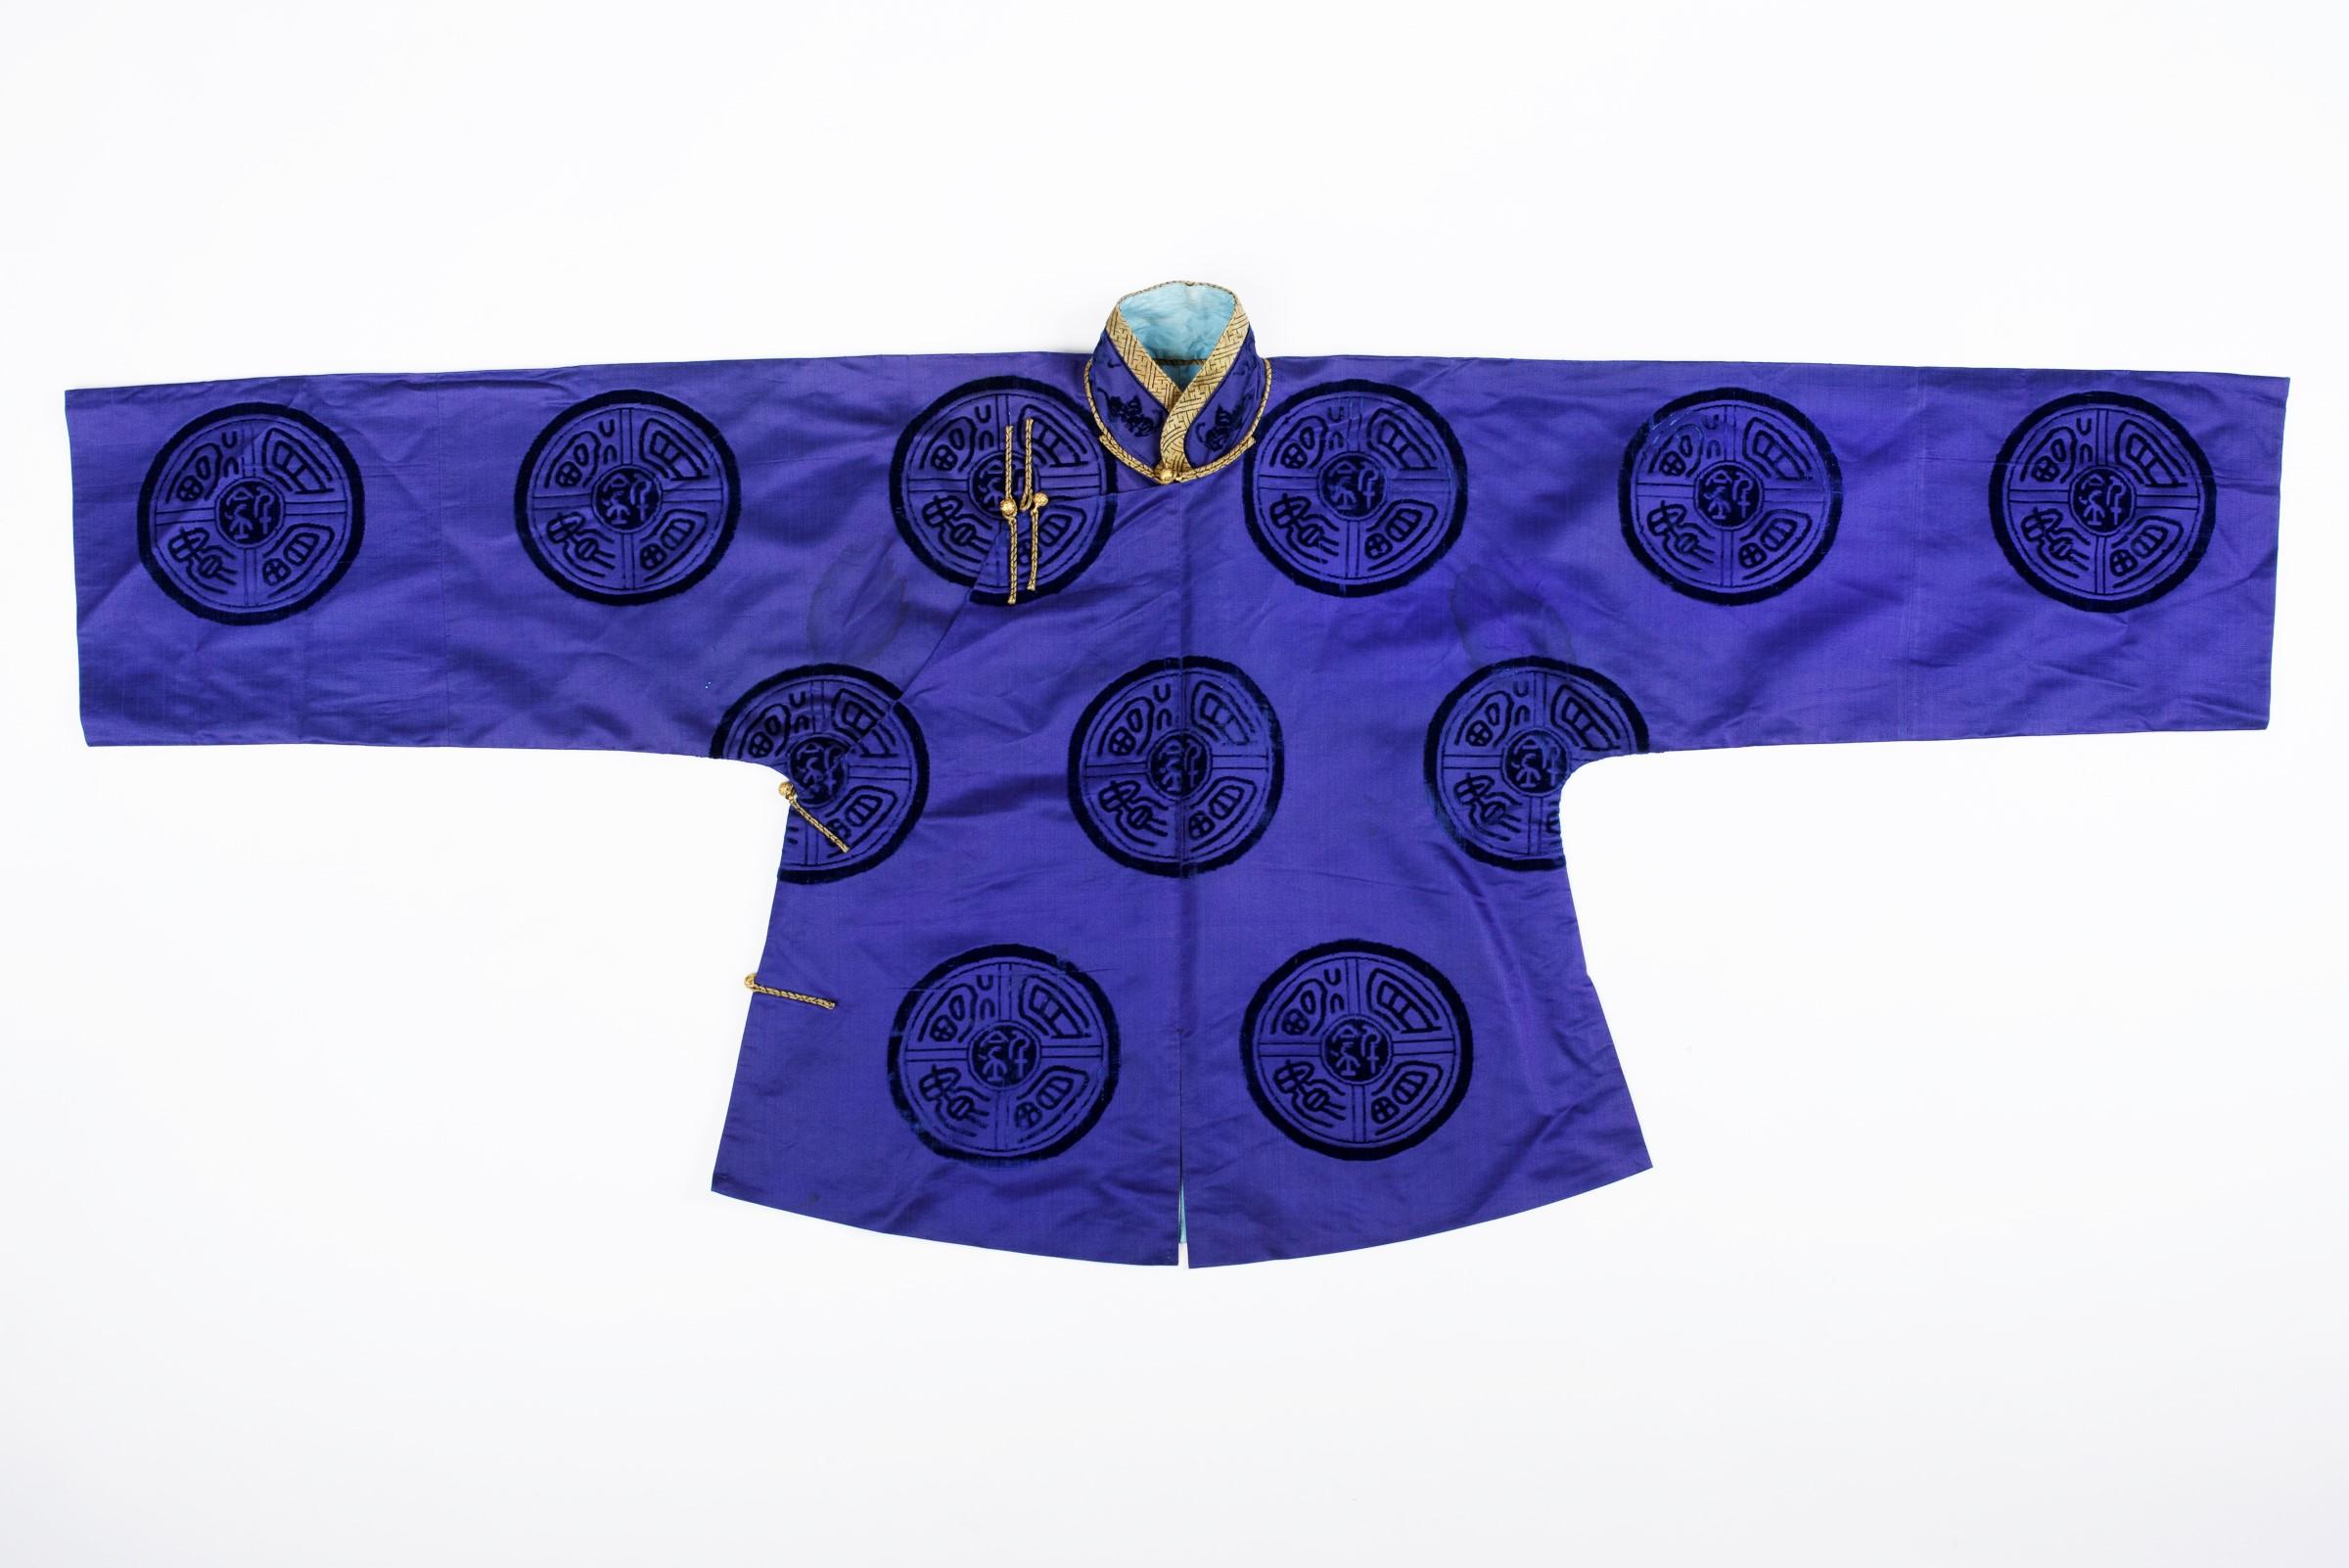 Circa 1920-1940
China

Informal Han woman's short tunic jacket, probably dating from the Soviet Republic of China under Mao Tse-tung, circa 1930. In replica of the 19th century, this tunic in mauve blue satin embroidered with large medallions with